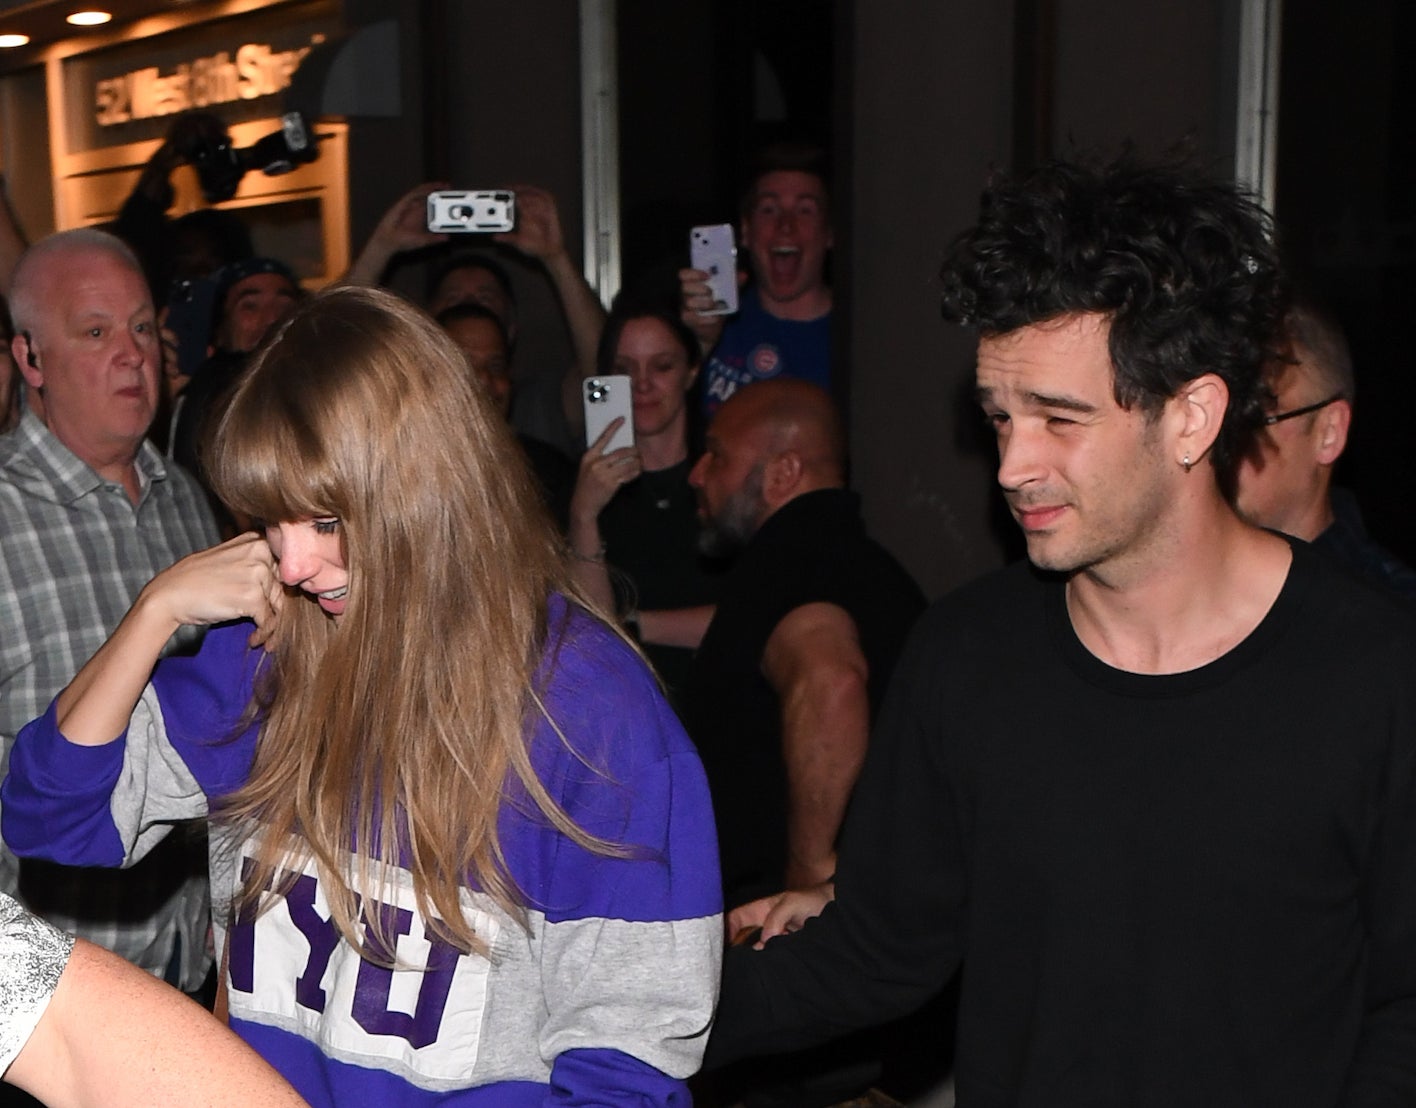 Taylor Swift in a casual outfit walks with Matty, surrounded by fans and security